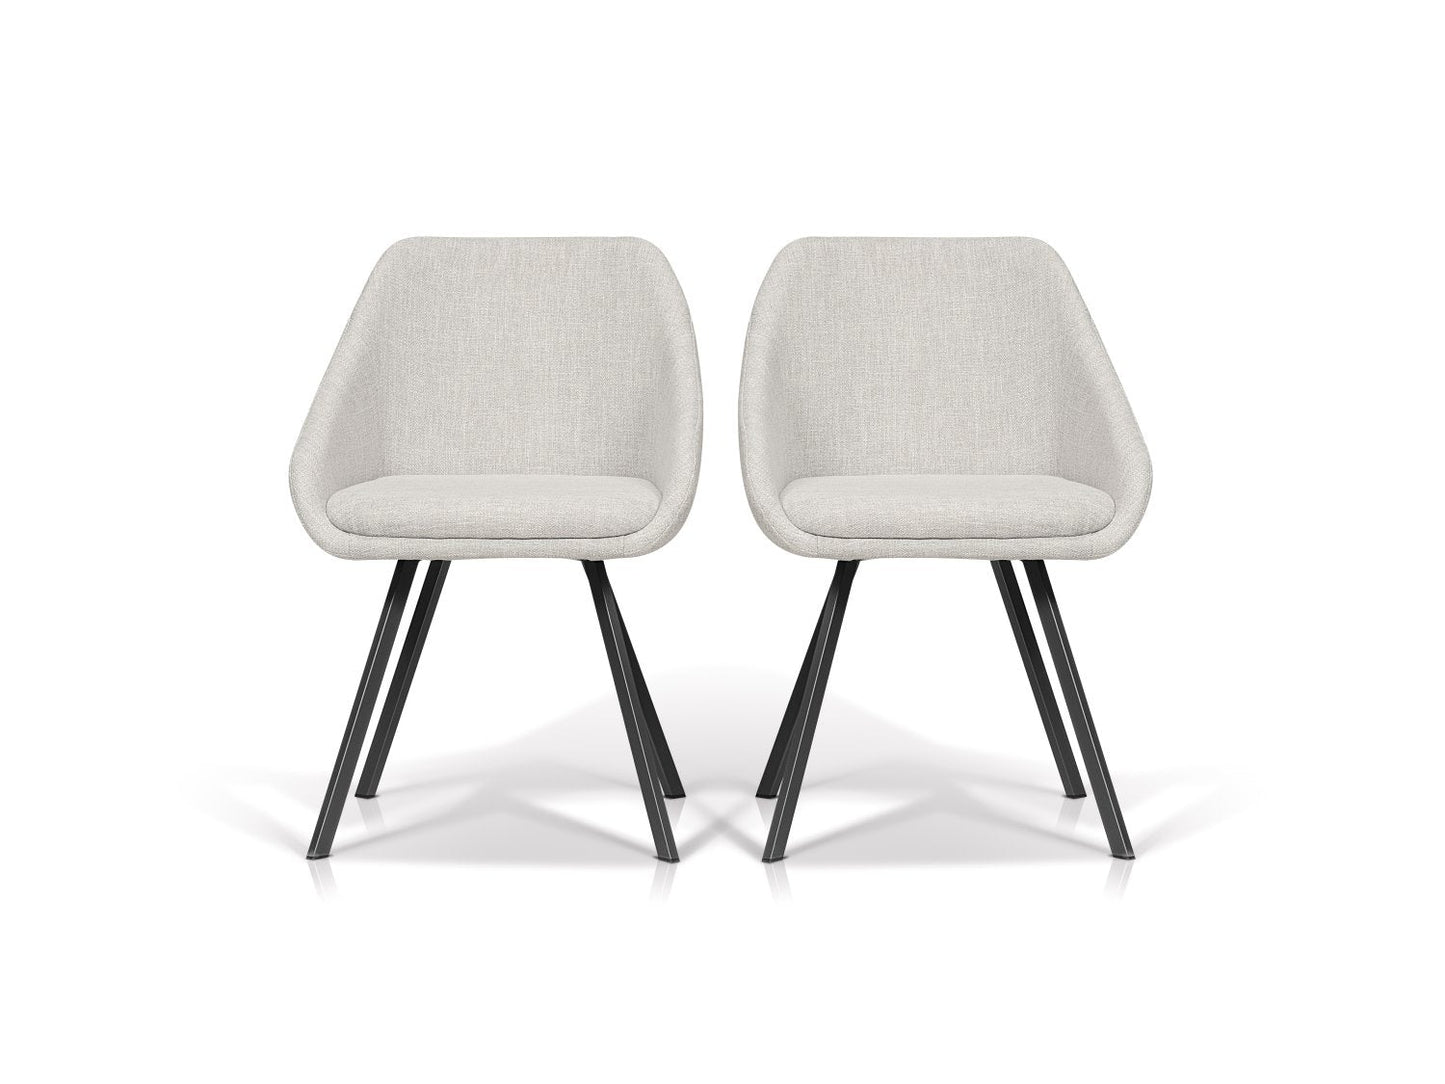 Asker I Dining Chair - Set of 2